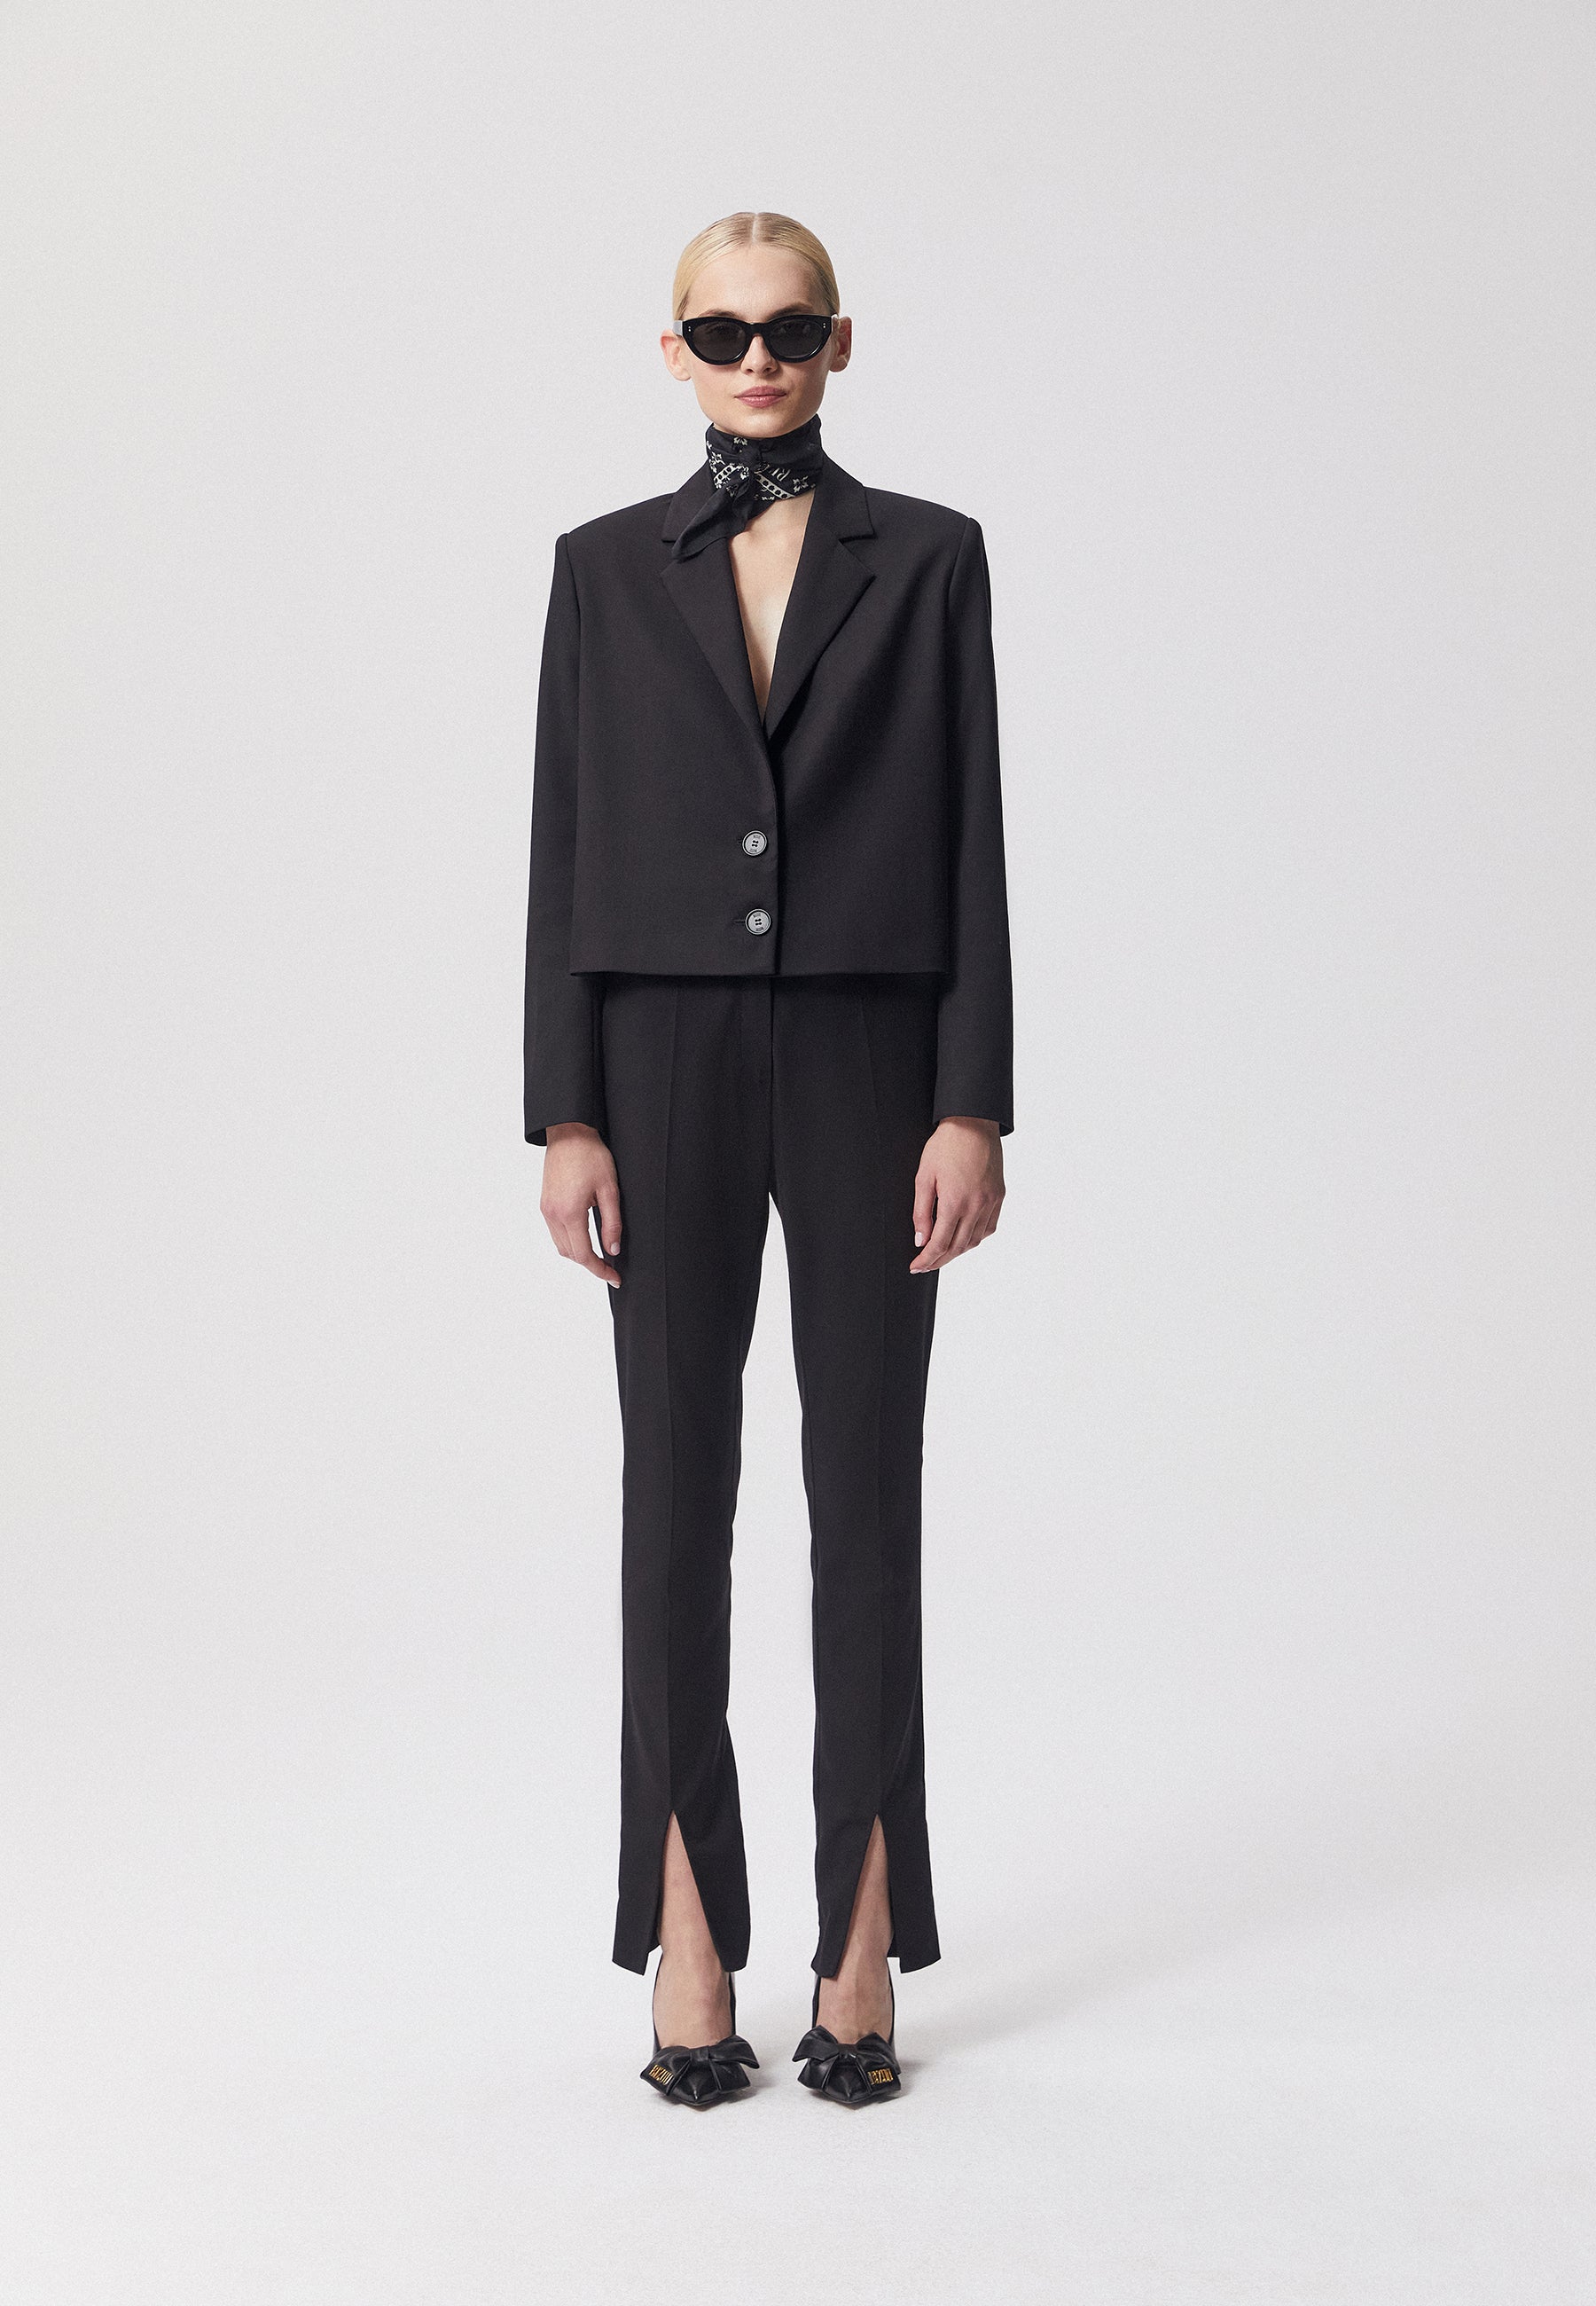 Suit trousers with slits HUALA in black